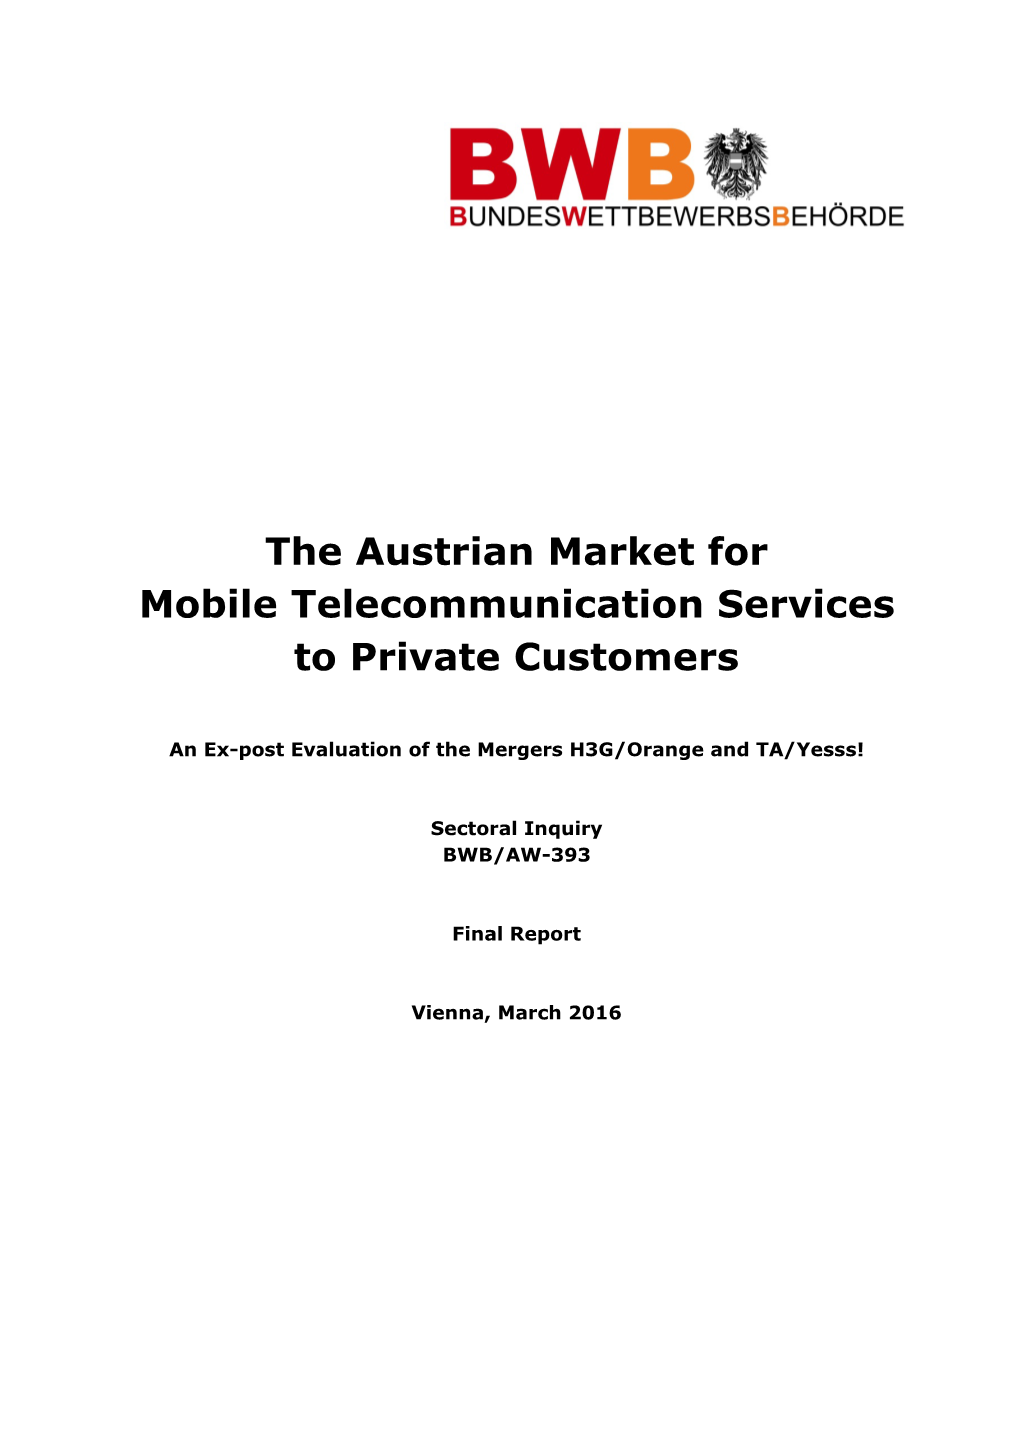 The Austrian Market for Mobile Telecommunication Services to Private Customers